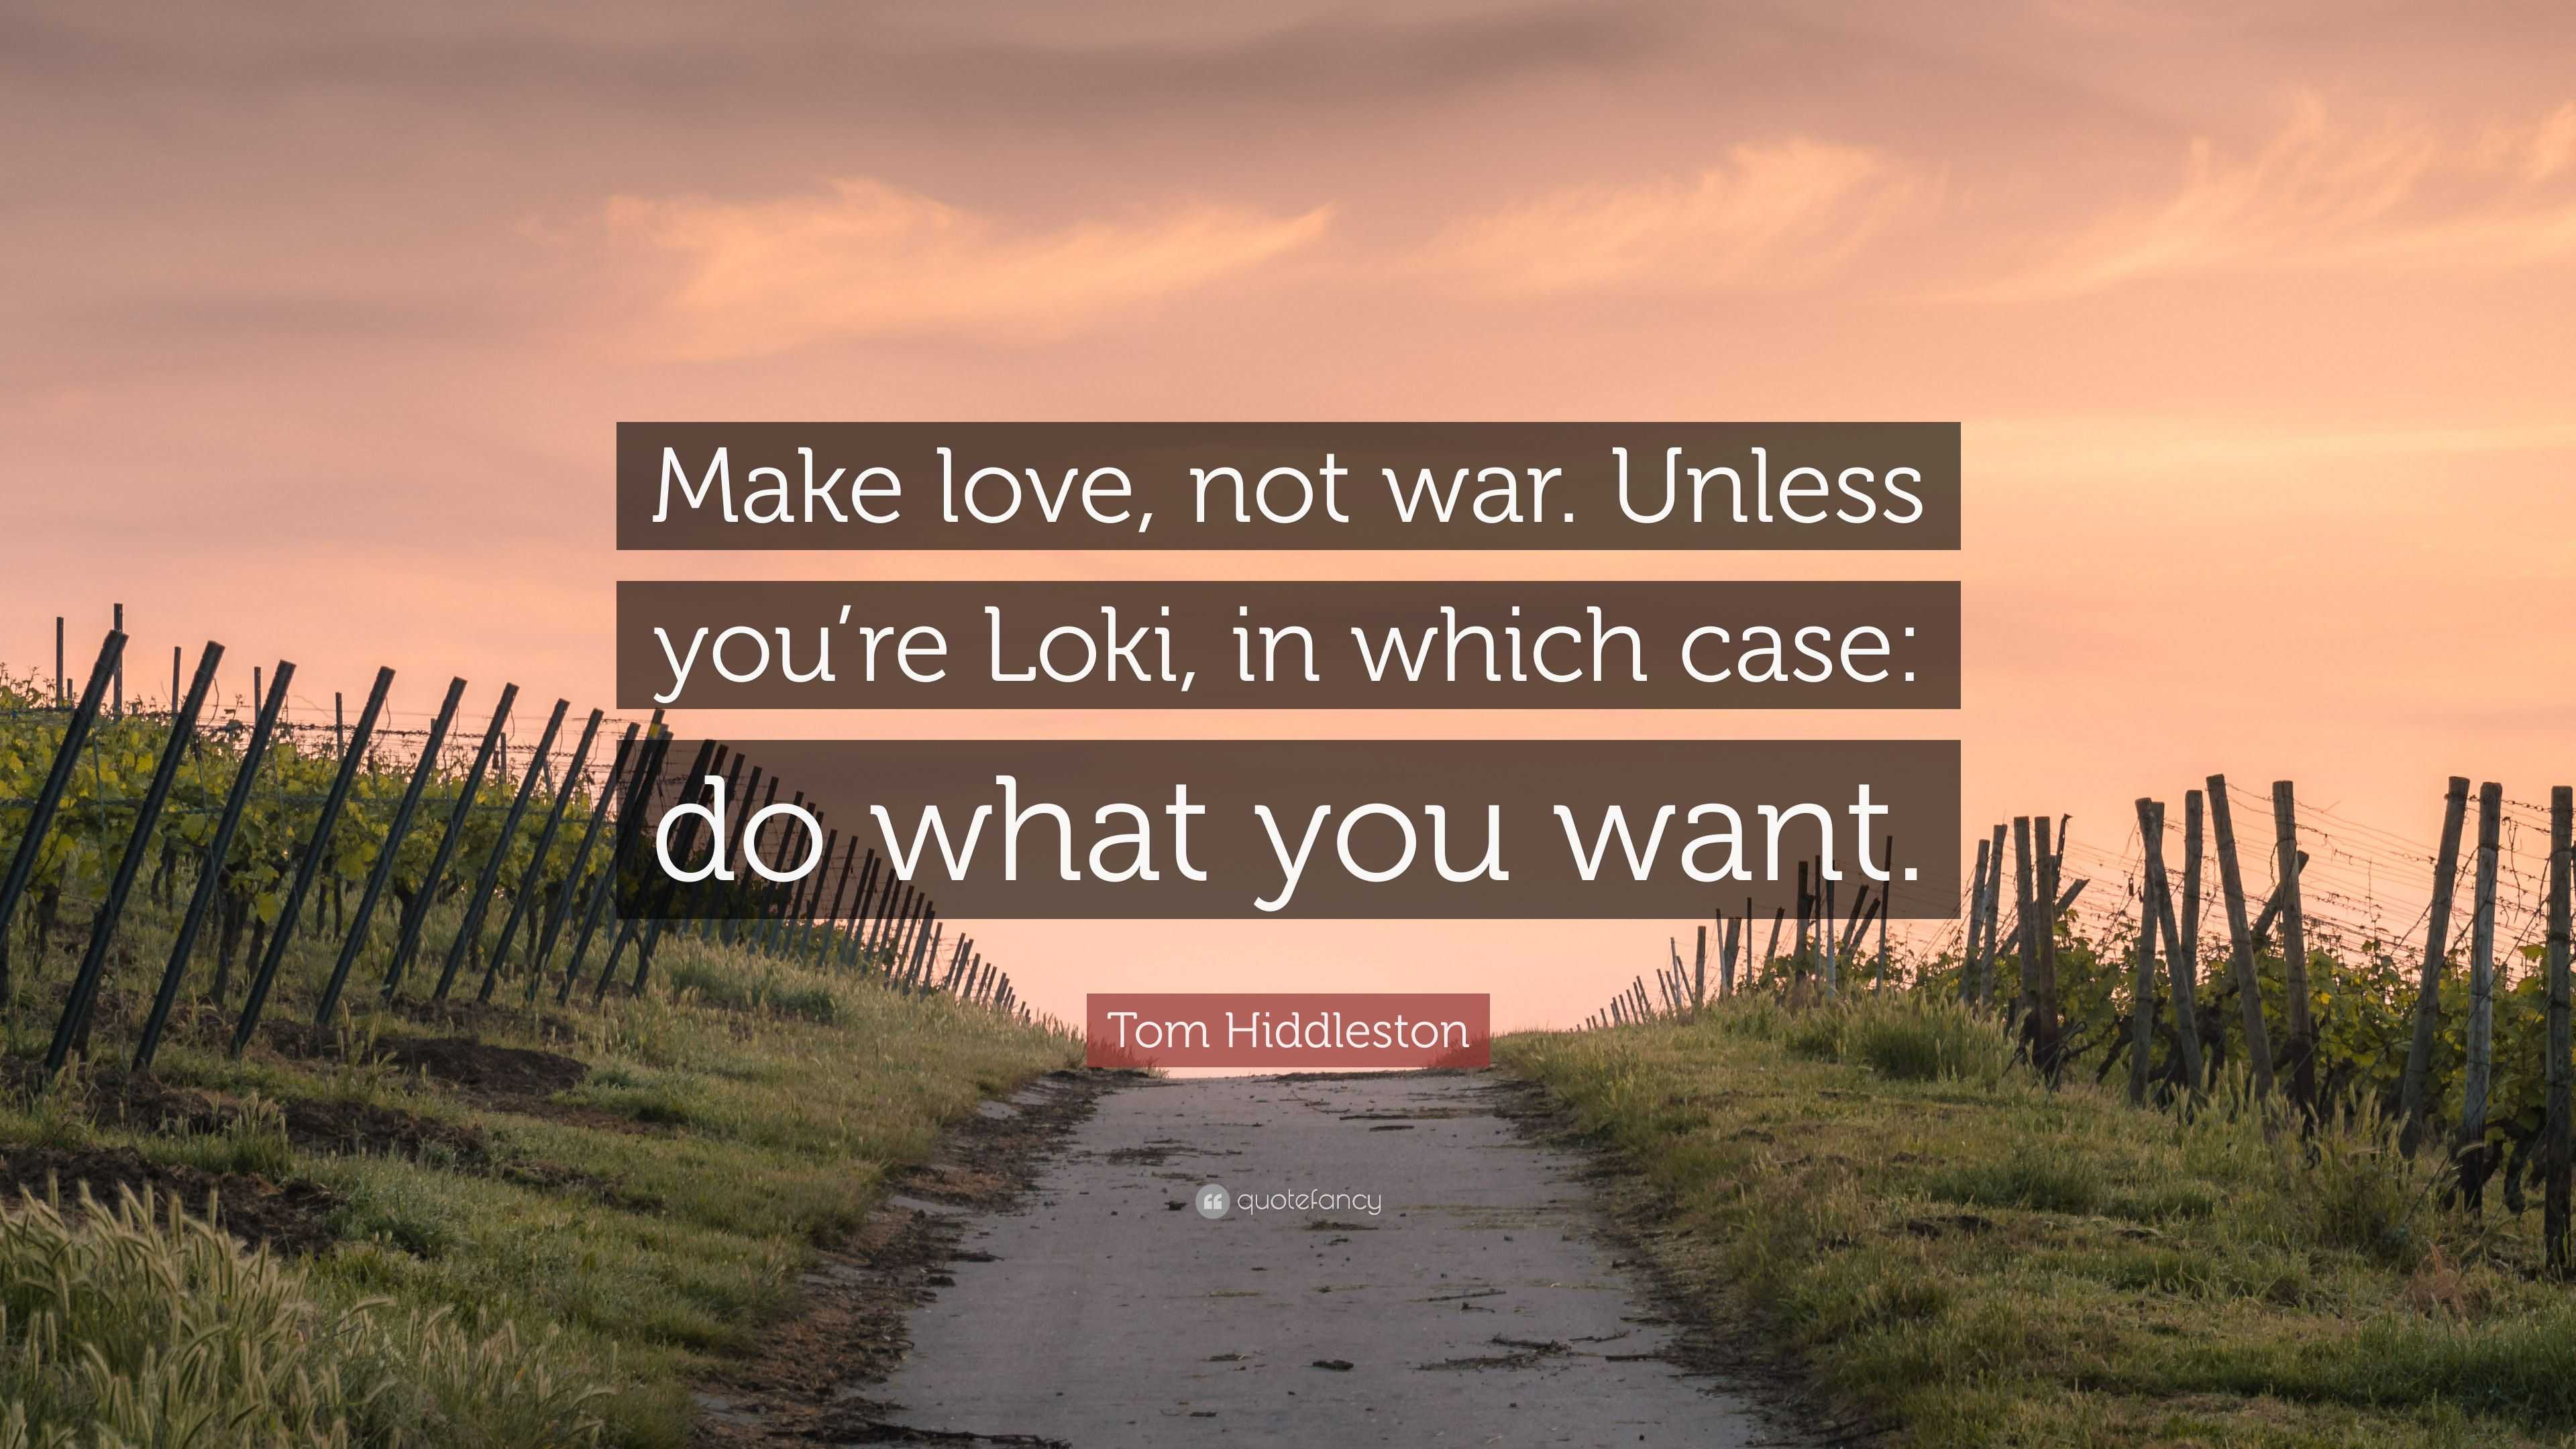 I Wanna Make Love To You Quotes Tom Hiddleston Quote “Make Love Not Warunless You View Image